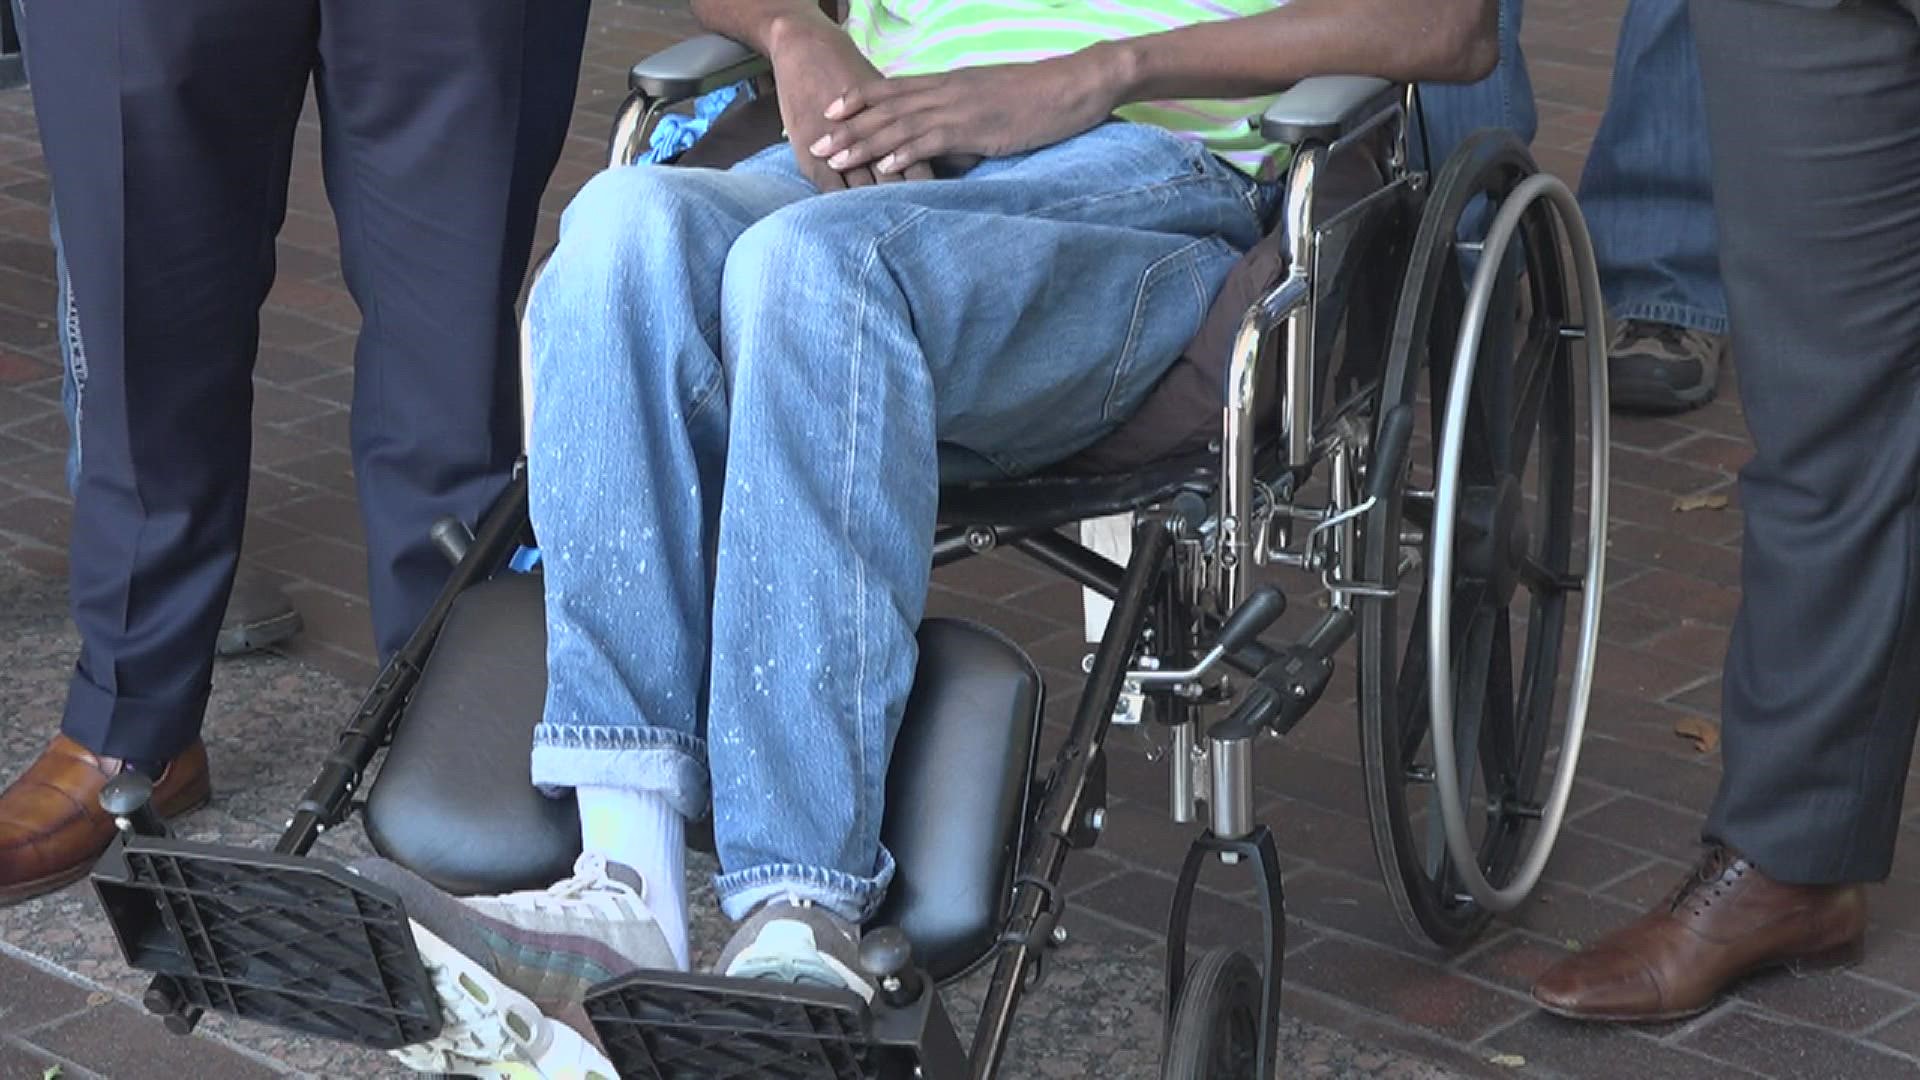 He said he ended up paralyzed after the officer allegedly slammed him to the ground.